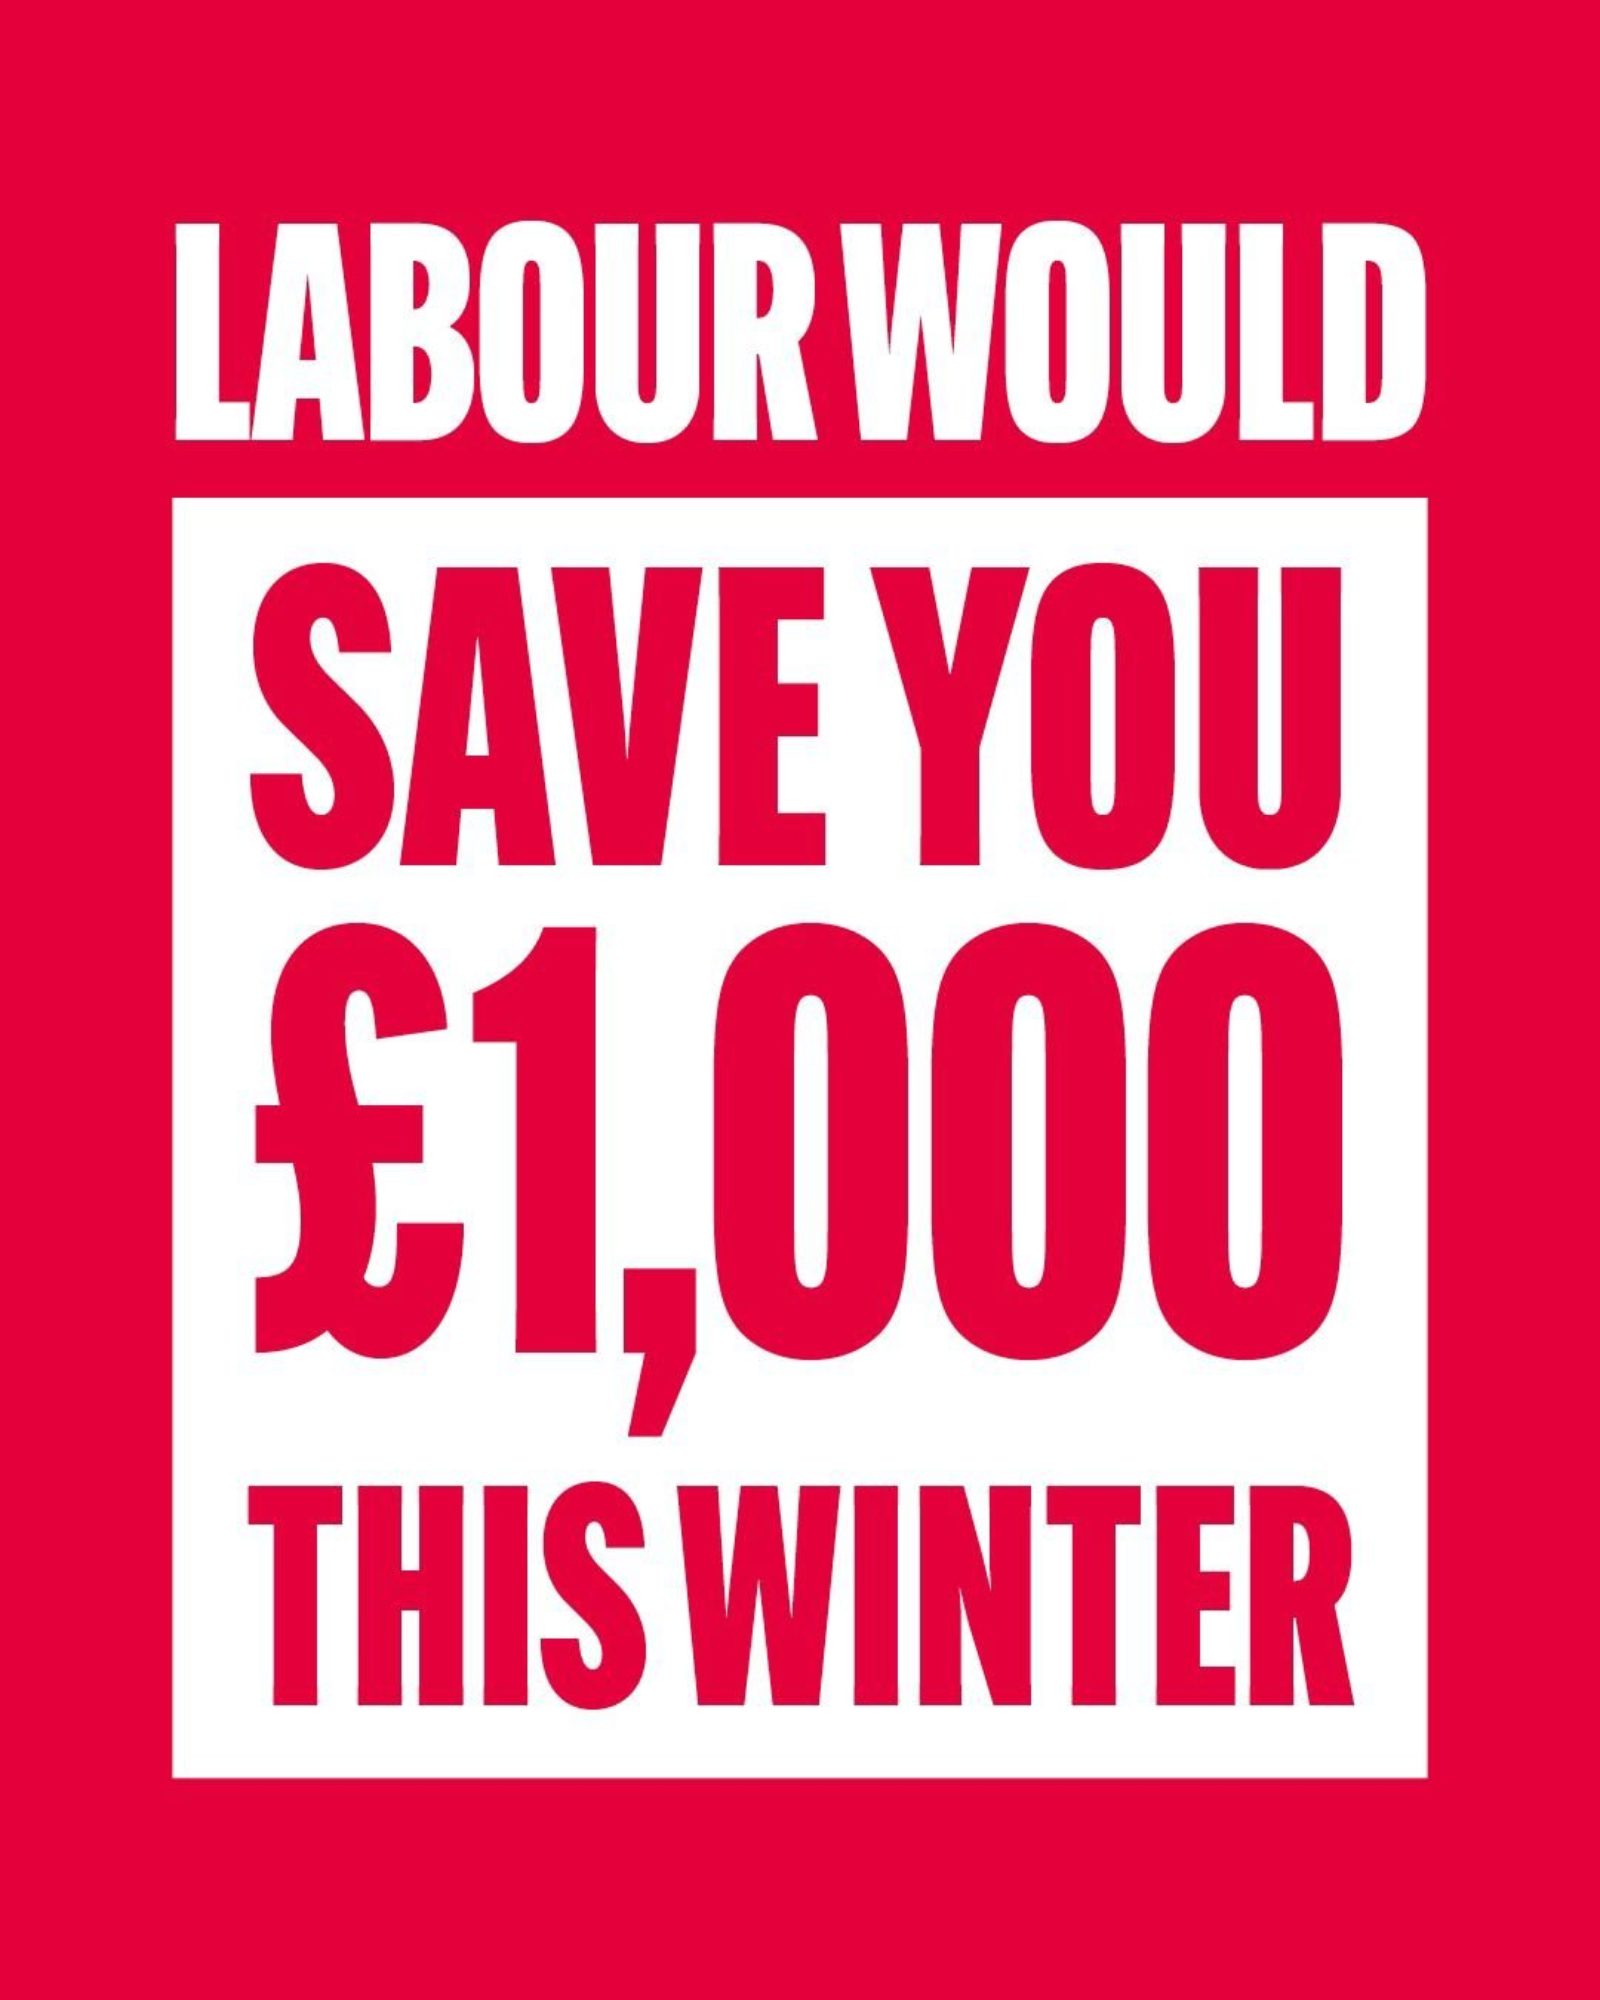 Labour would save you £1,000 this Winter